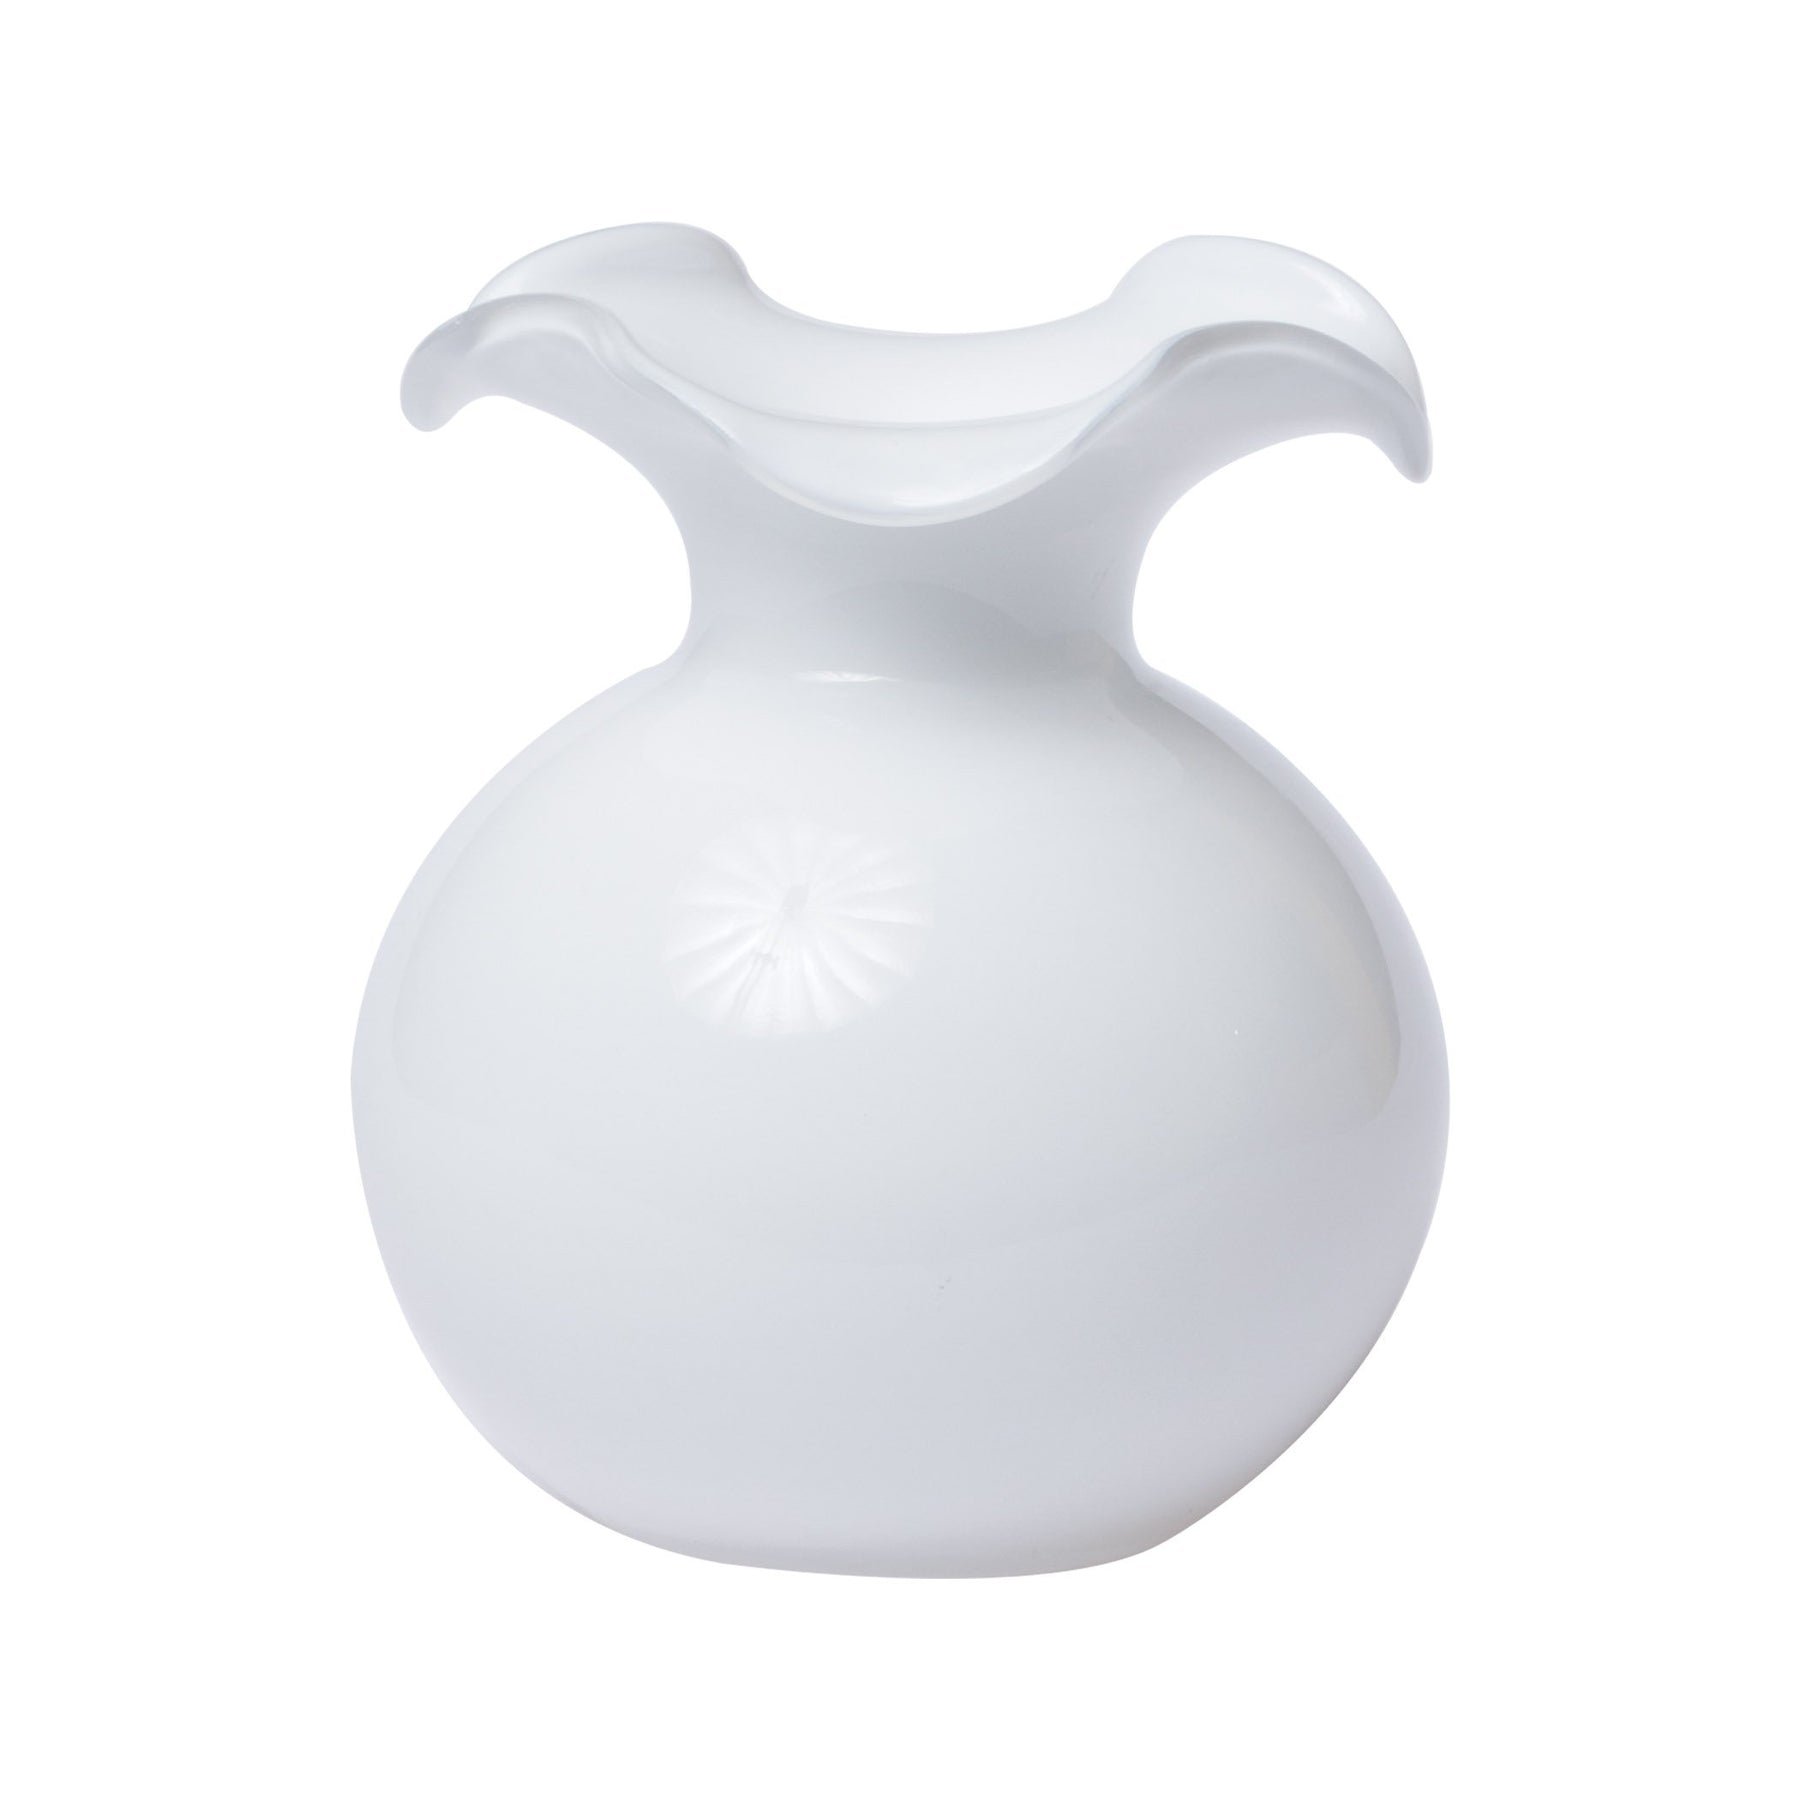 29832 - White Hibiscus Fluted Small Vase - $100